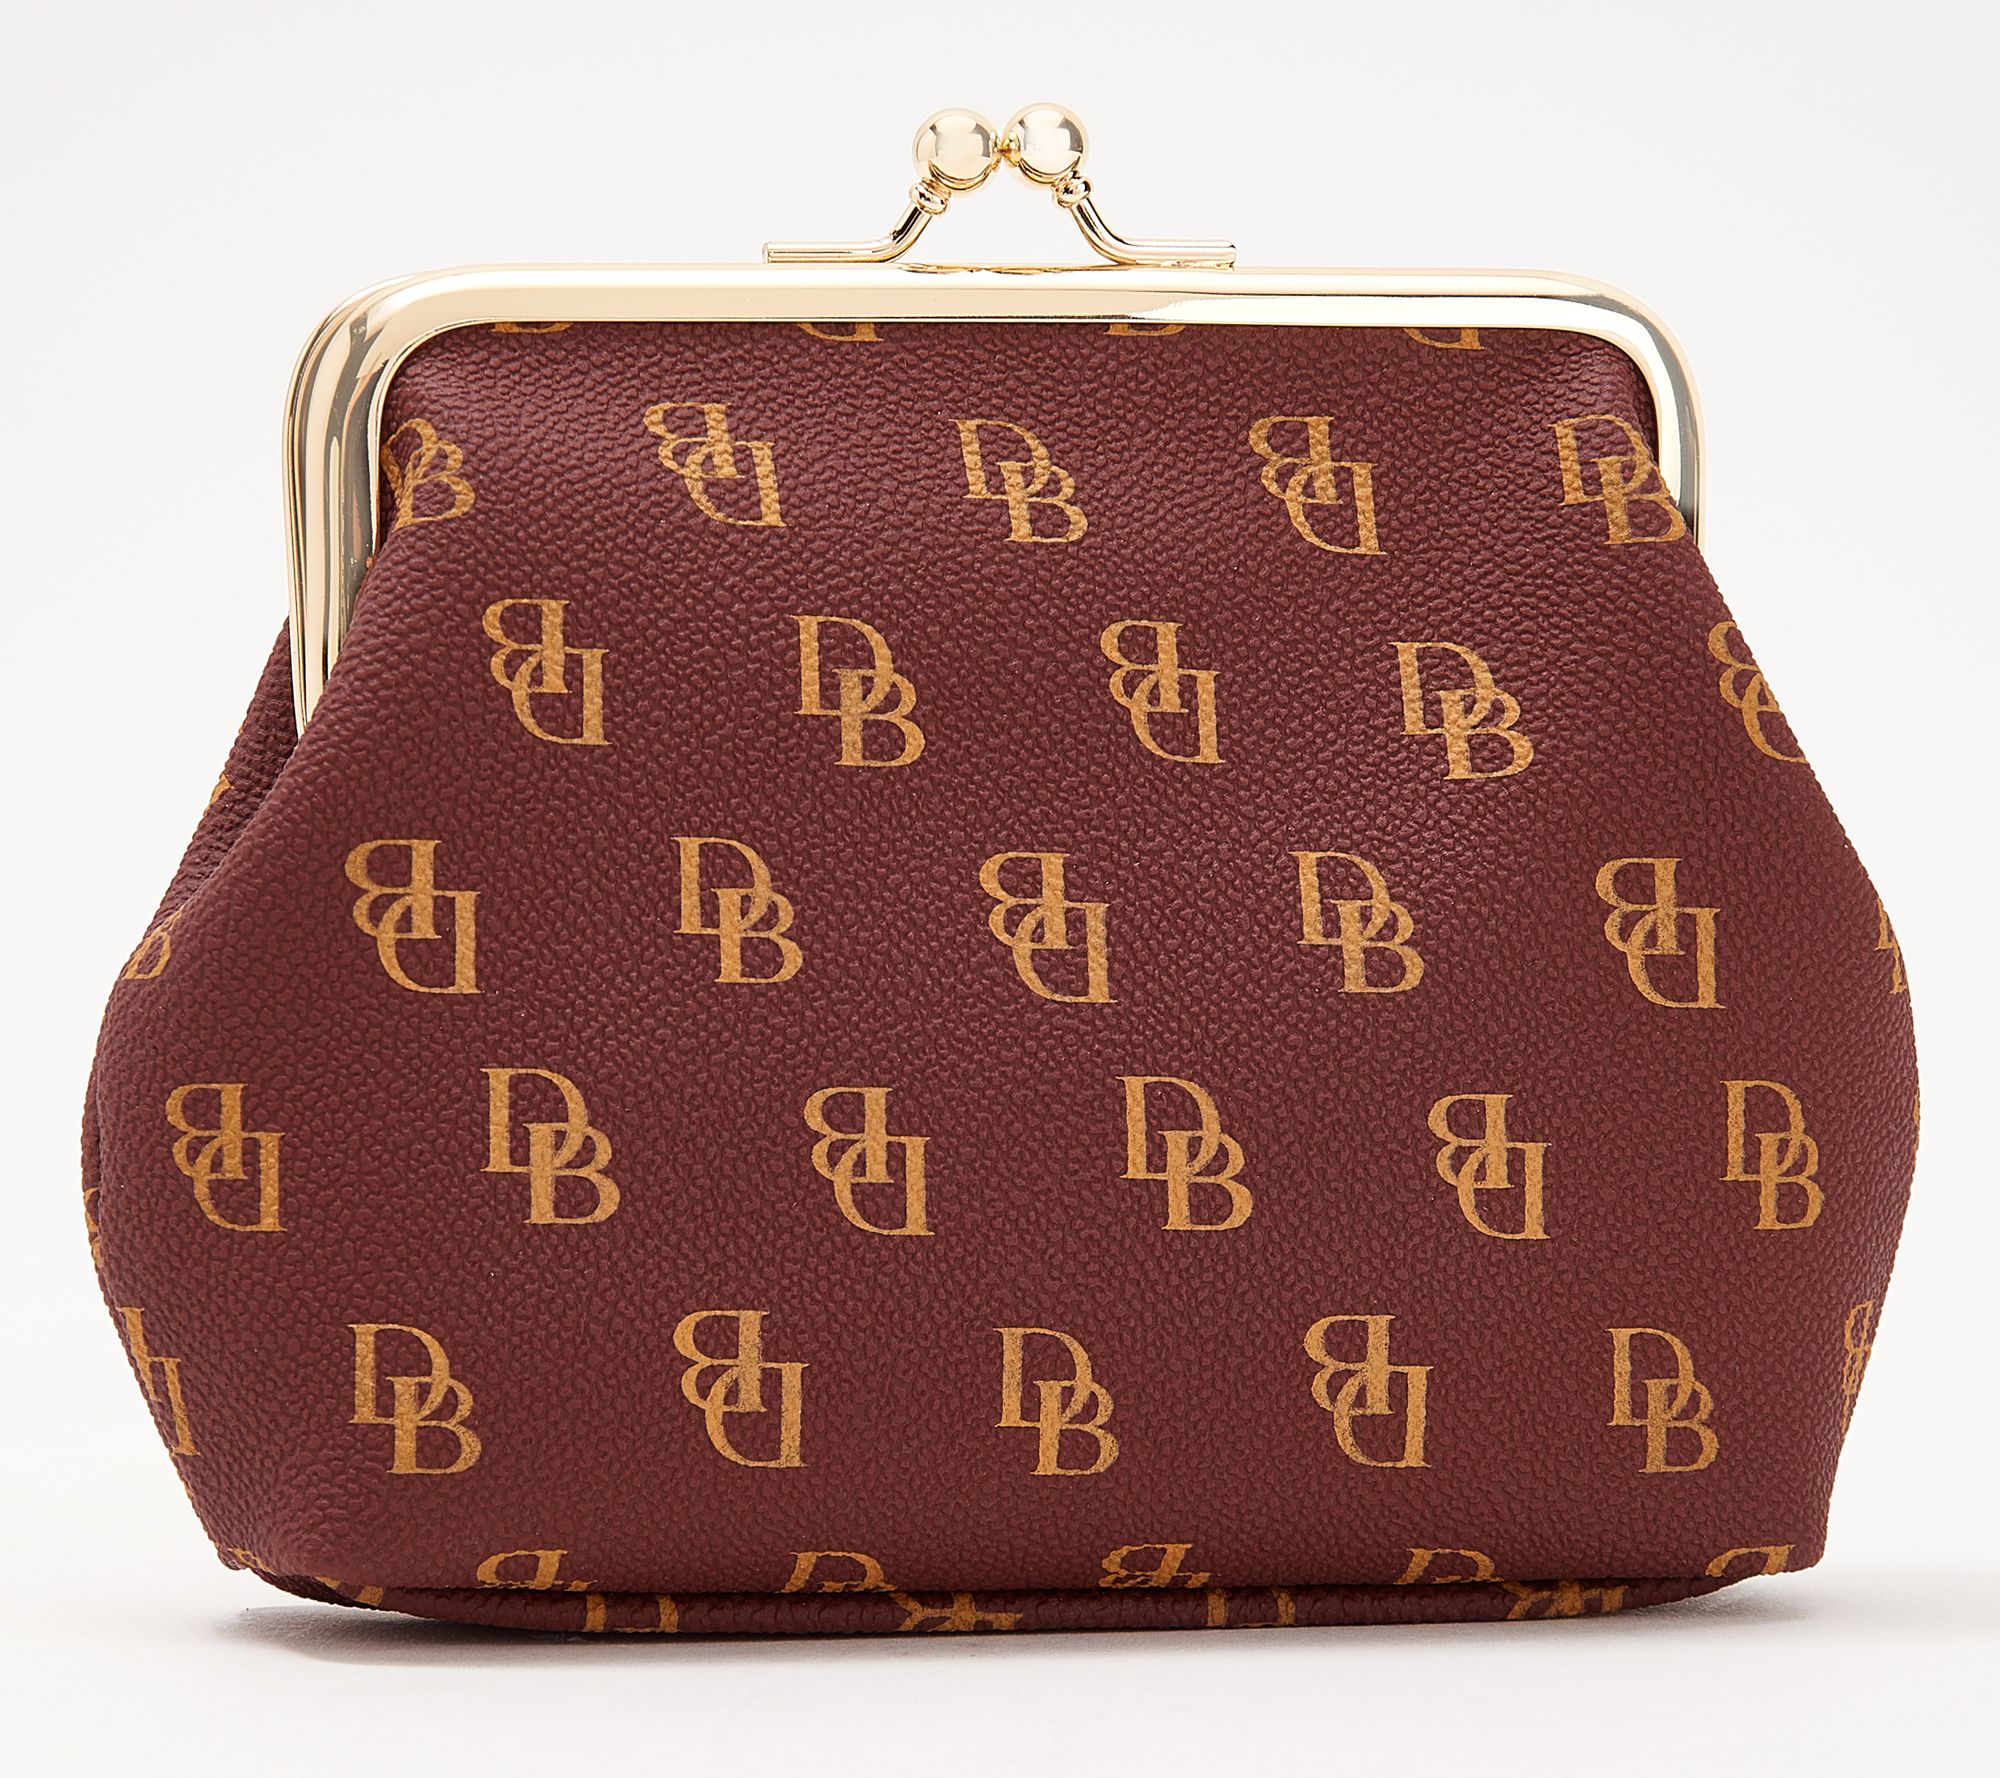 Dooney & Bourke Wexford Smooth Leather Kisslock Coin Purse on QVC